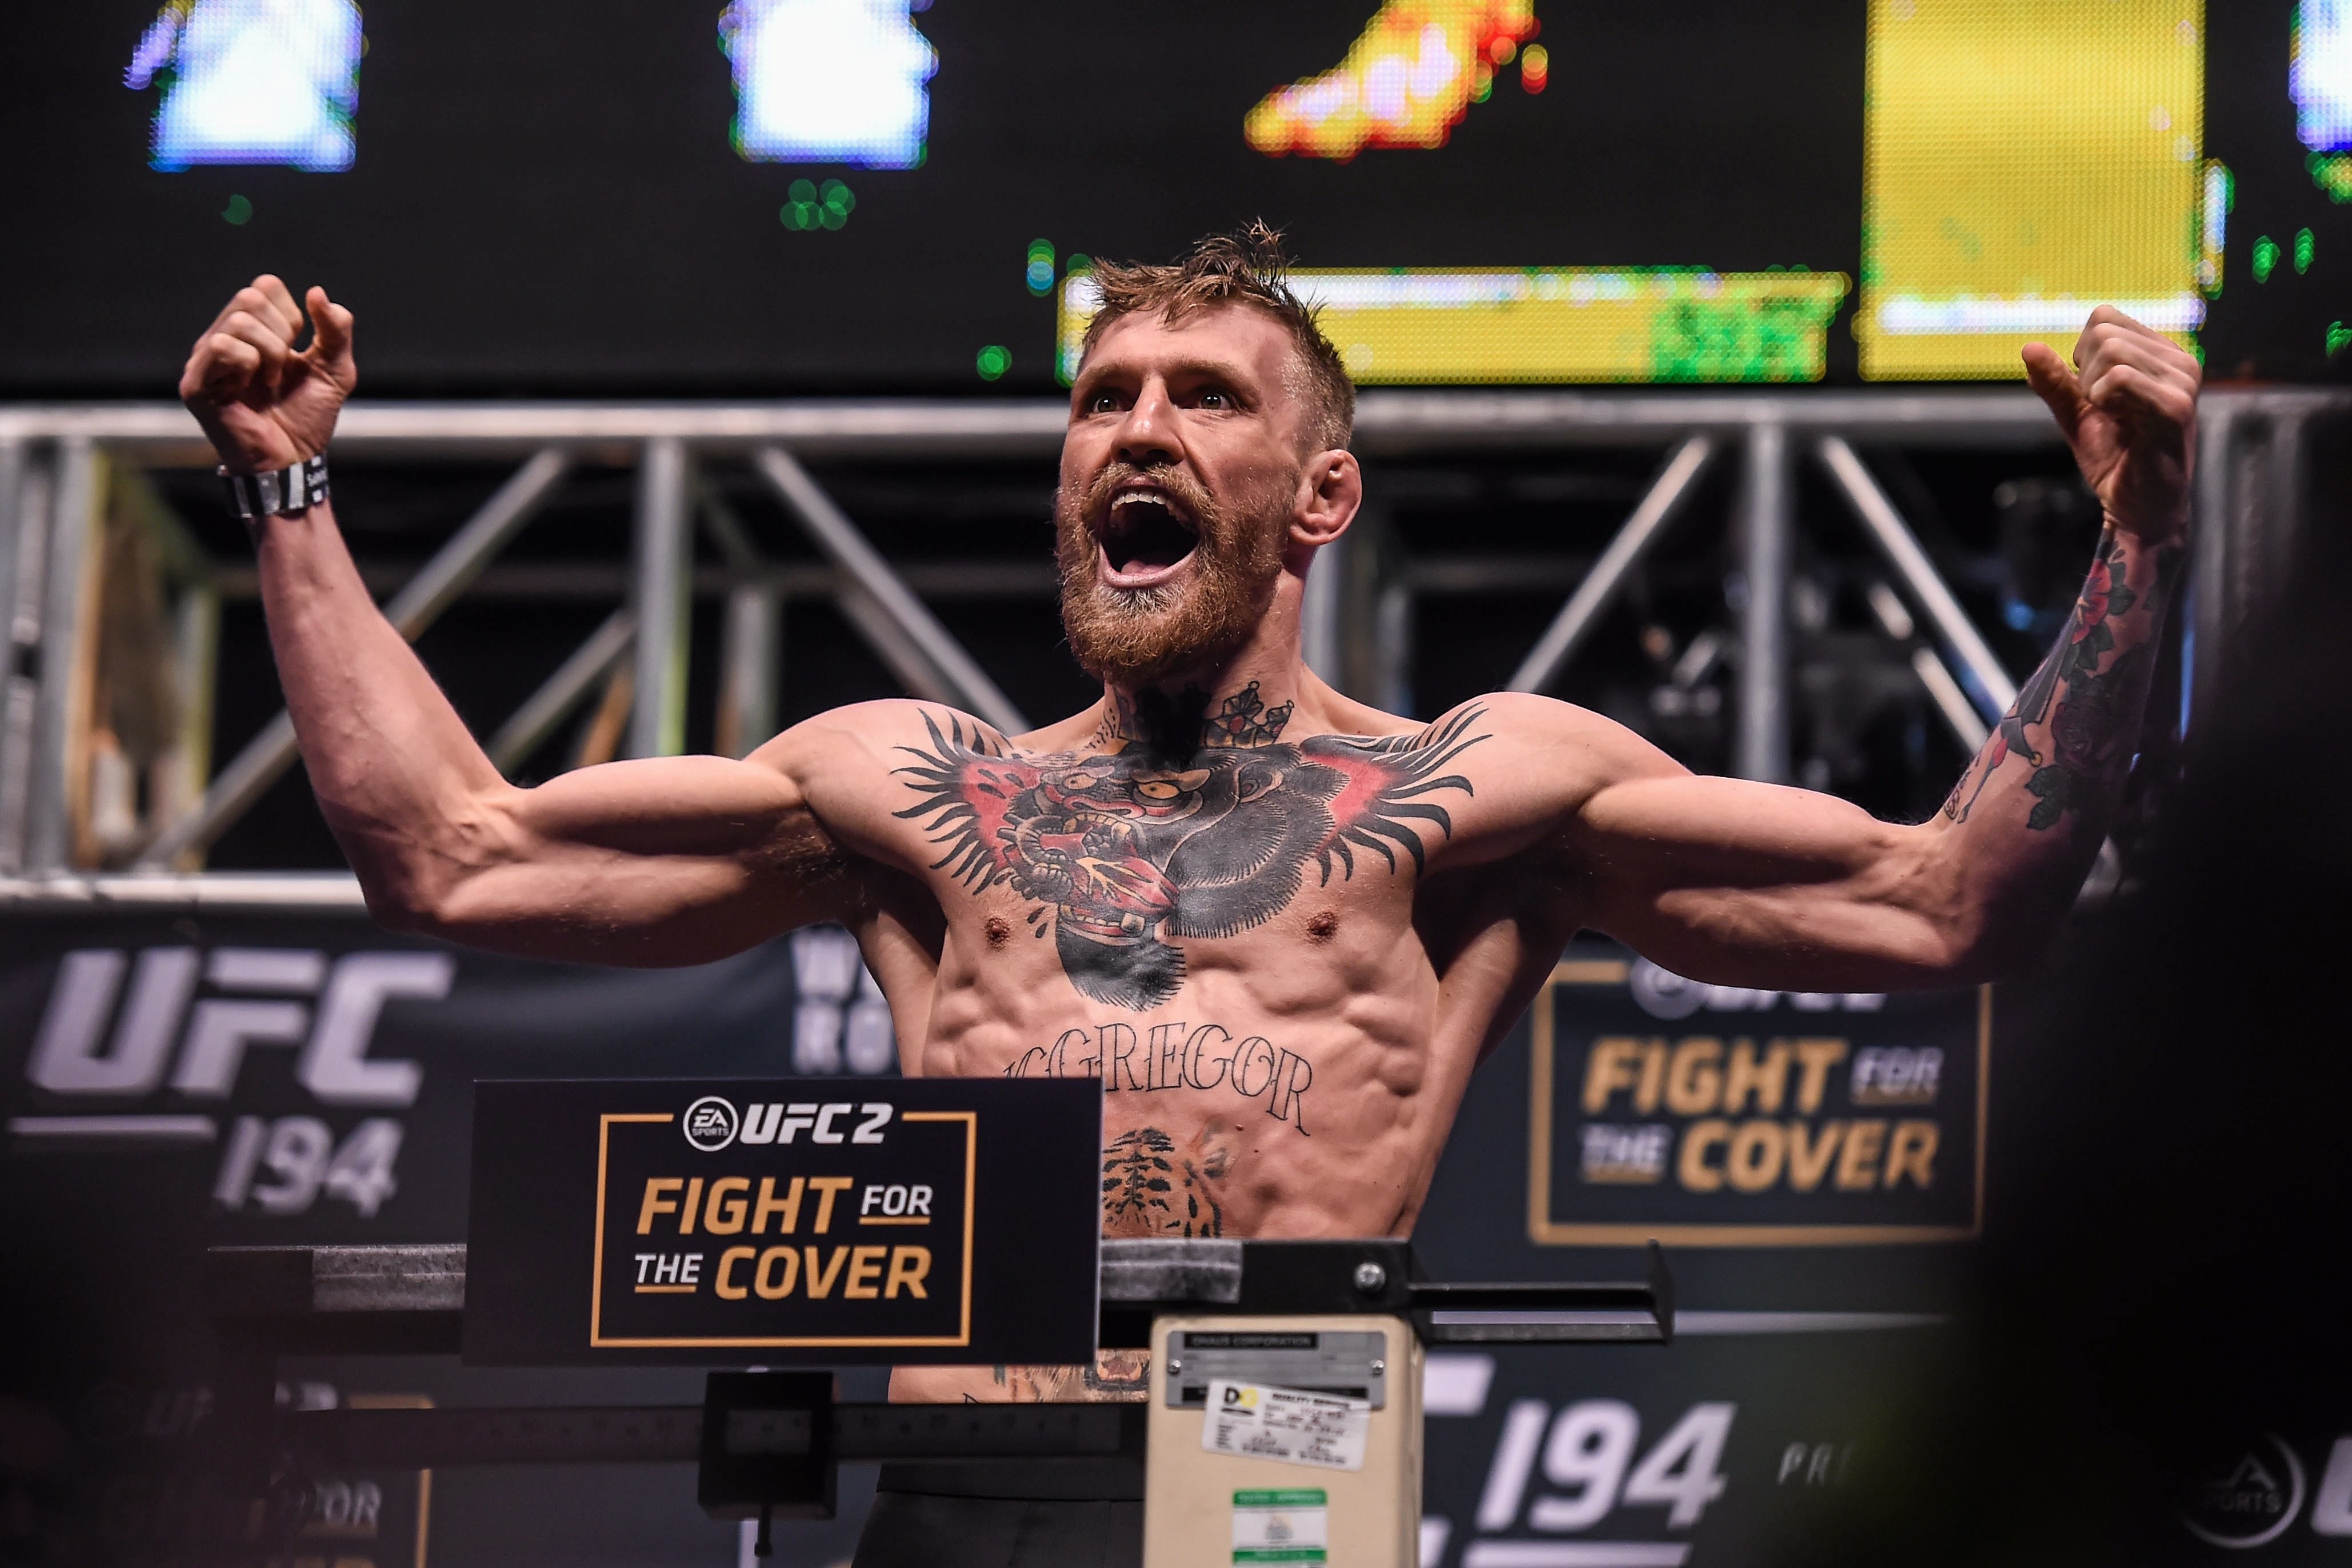 Conor McGregor Looks Skinny At 155 Pounds, But We'll Never When